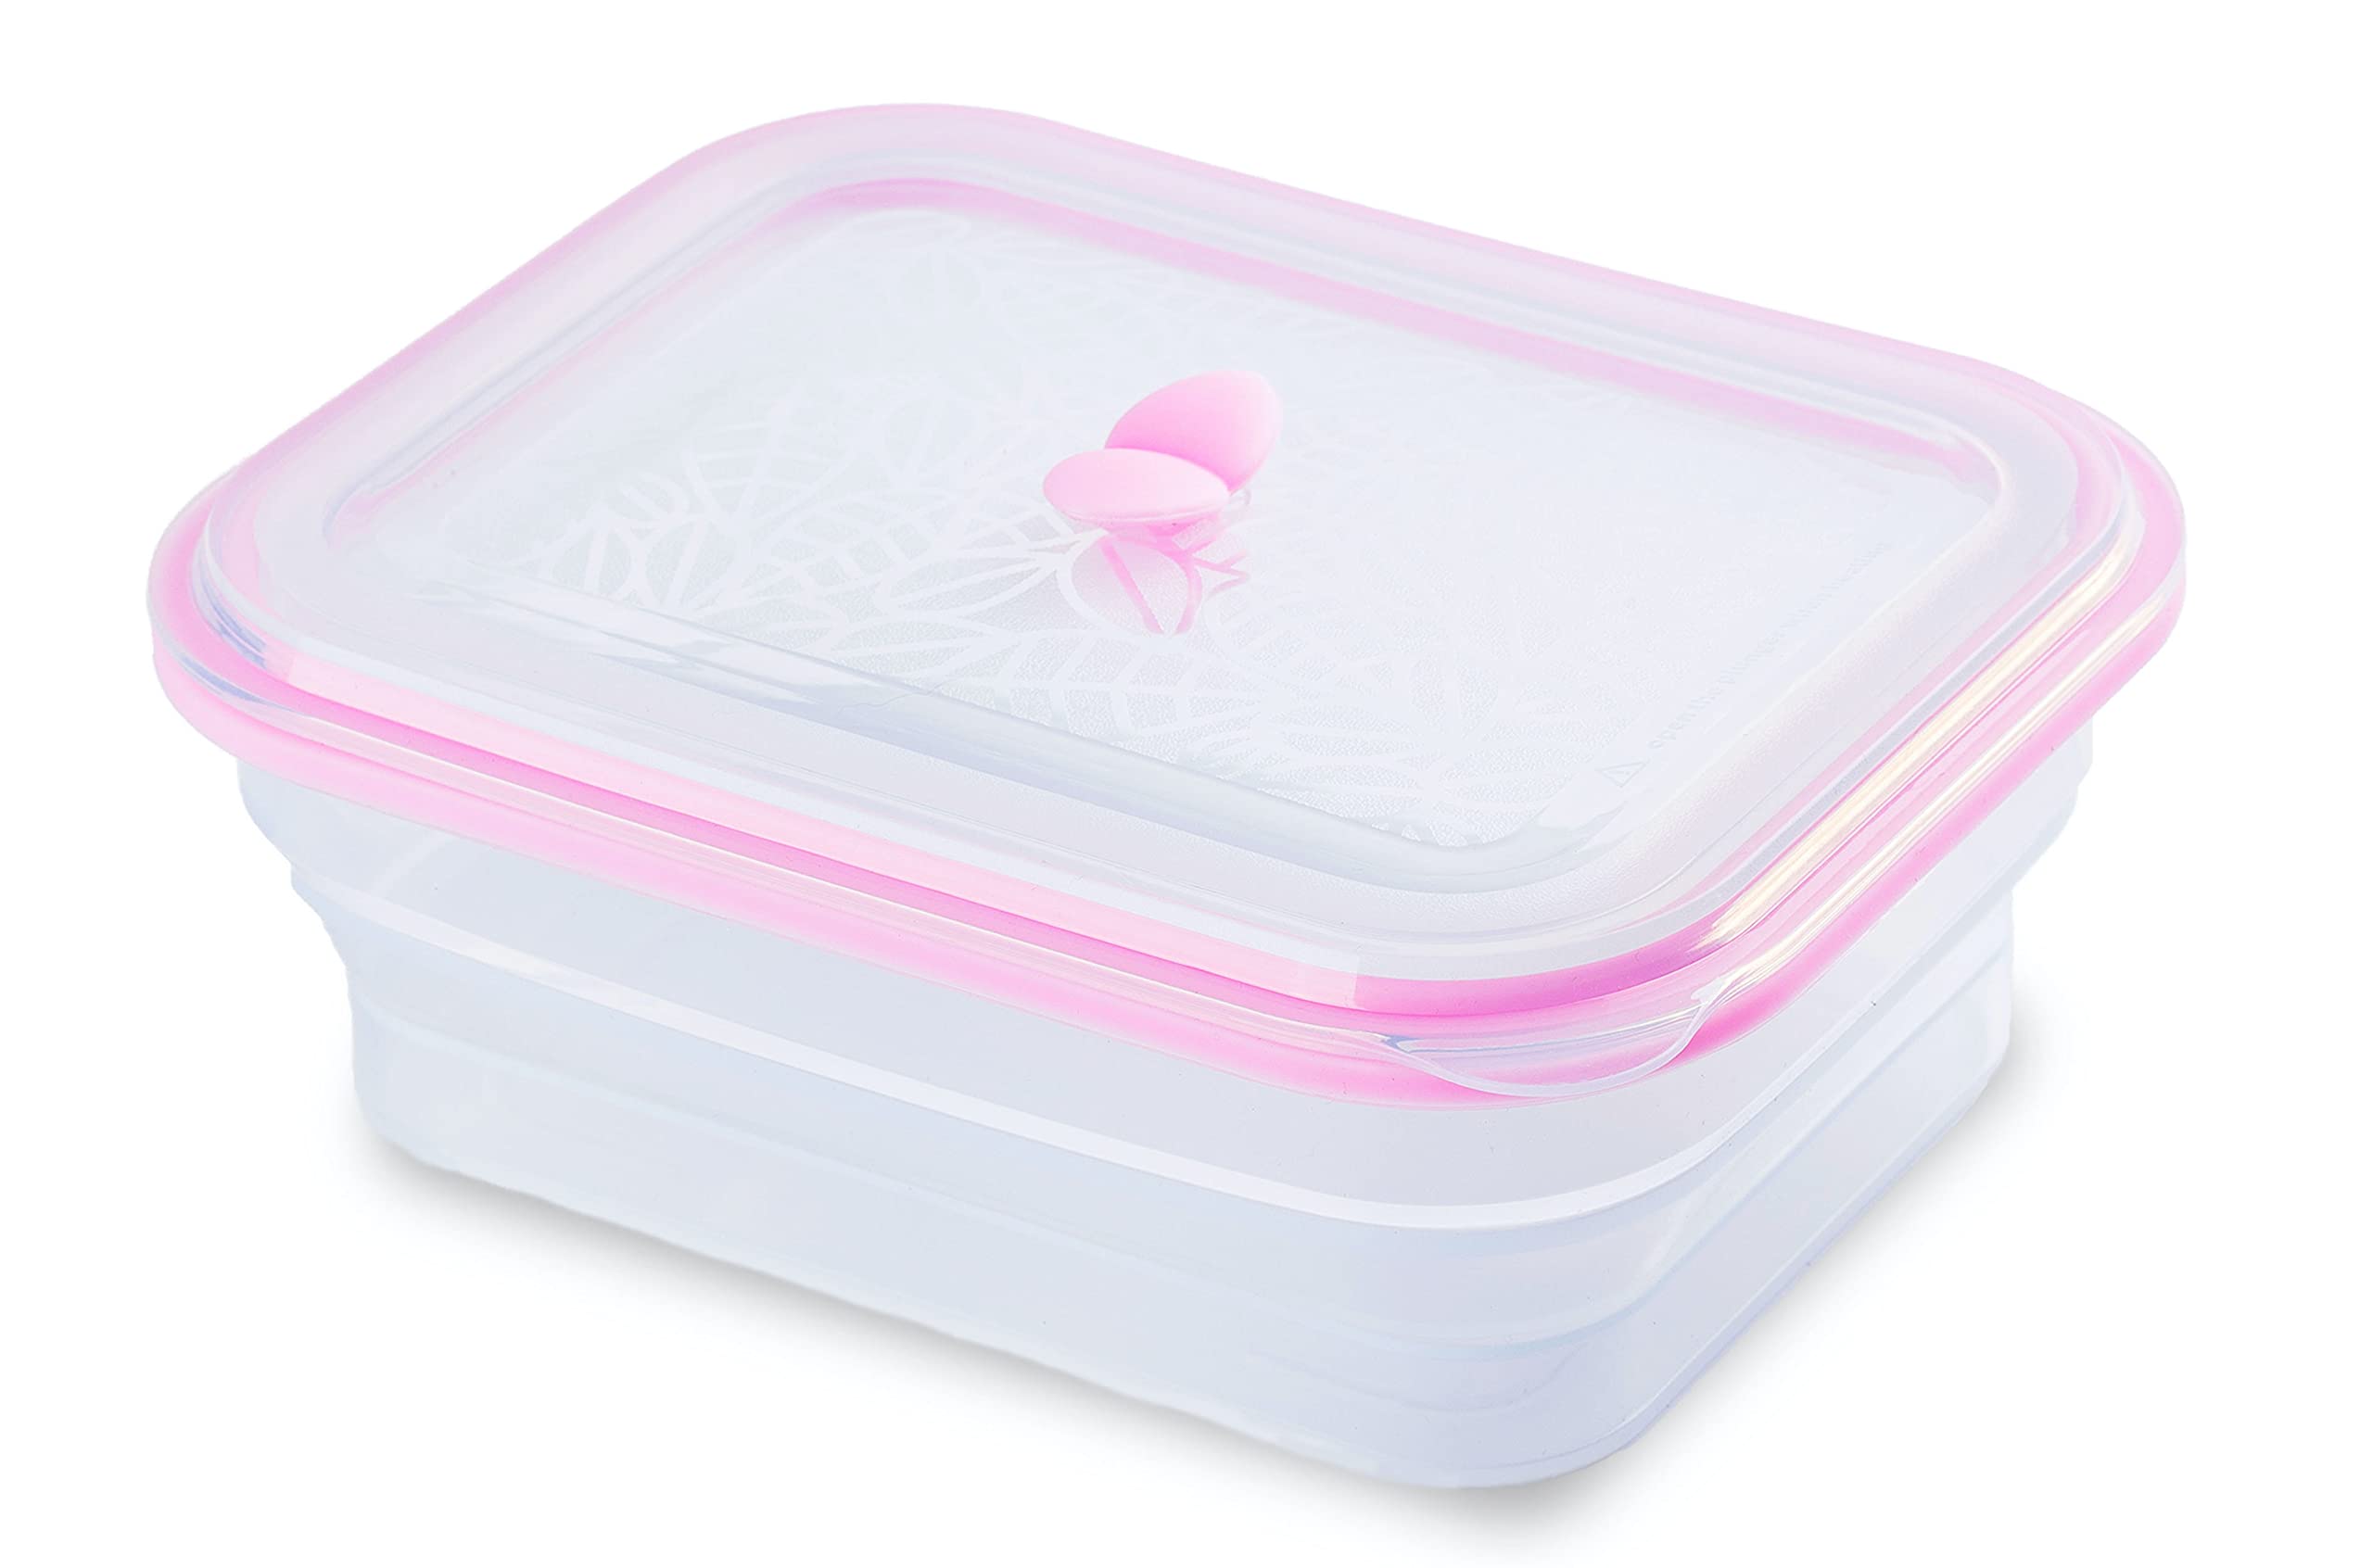 Pristain Platinum 100% Silicone Food-grade Plastic-free Collapsible Container- Microwave-safe, Dishwasher-safe, Environment-friendly (Orchid Pink)